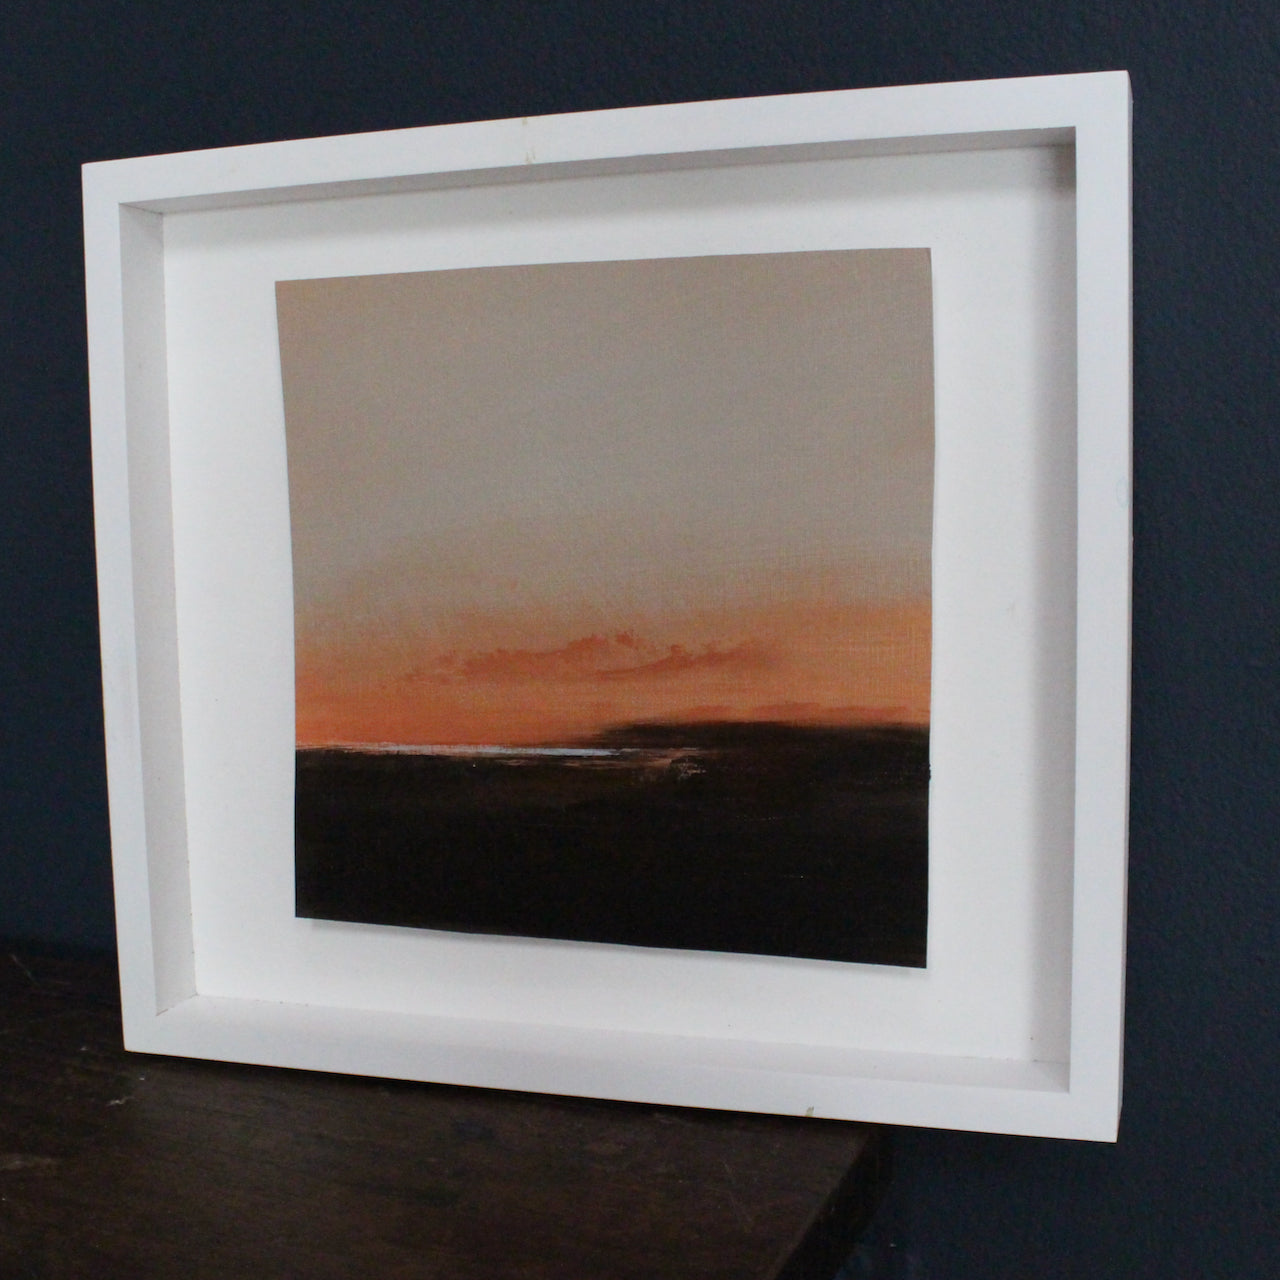 Dark headland with shimmering sea and dusk pink tone sky by artist Nicola Mosley.